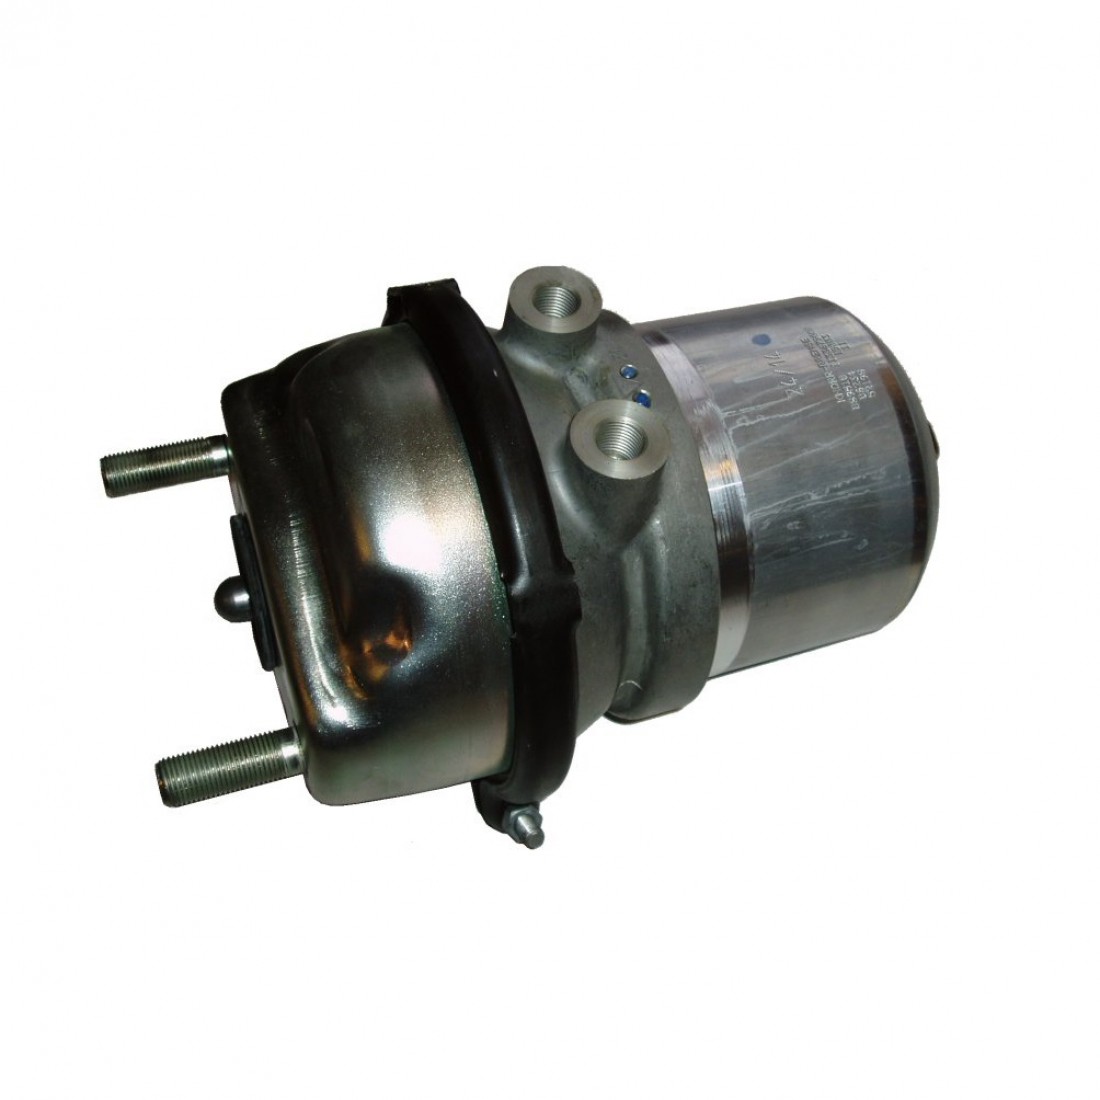 Spring Brake Cylinder, Right
replaces Knorr: K018094 / T 24/14